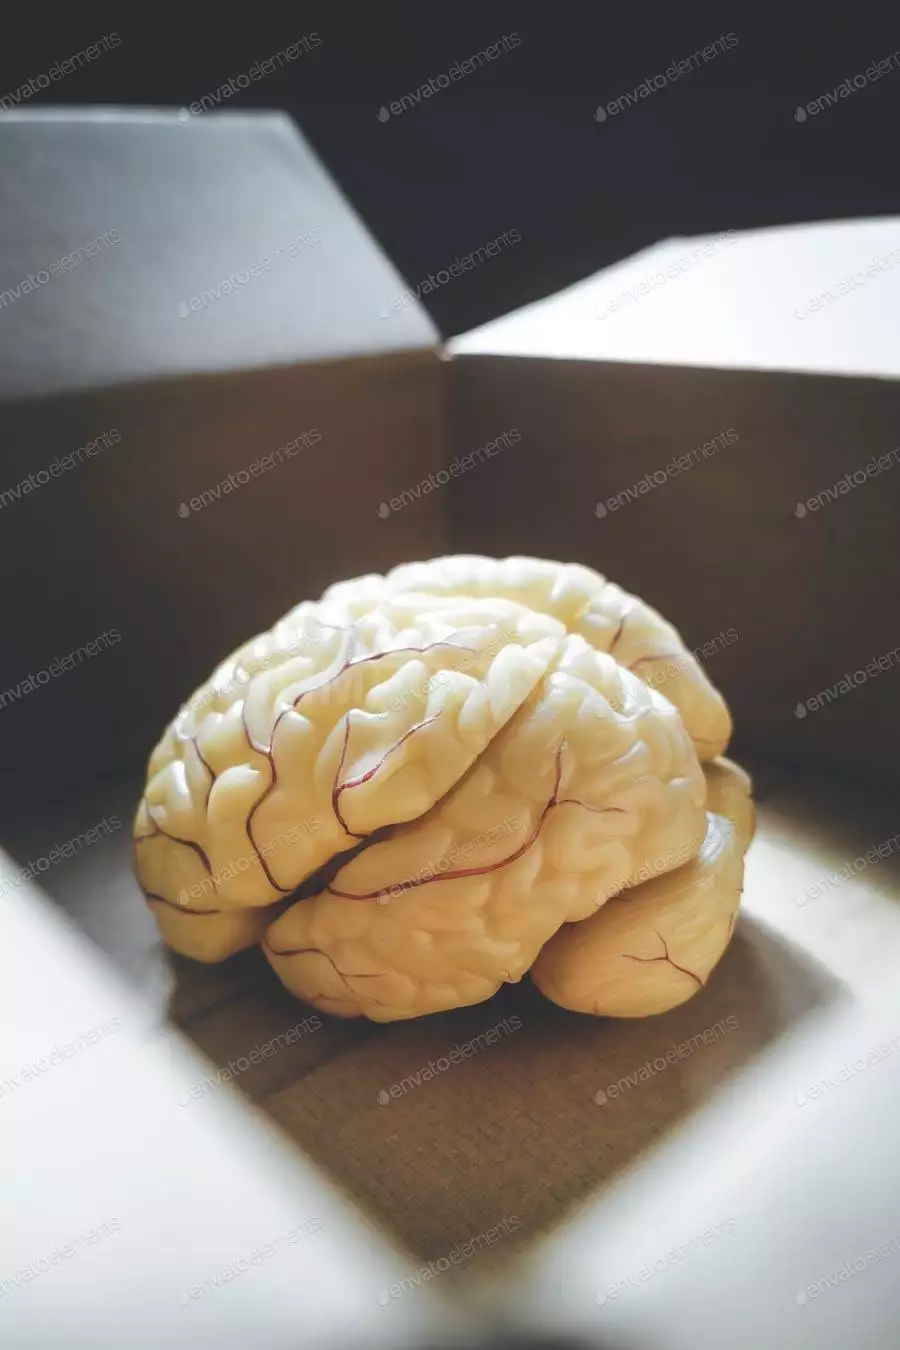 Close-up Of Human Brain Anatomical Model In An Open Box.